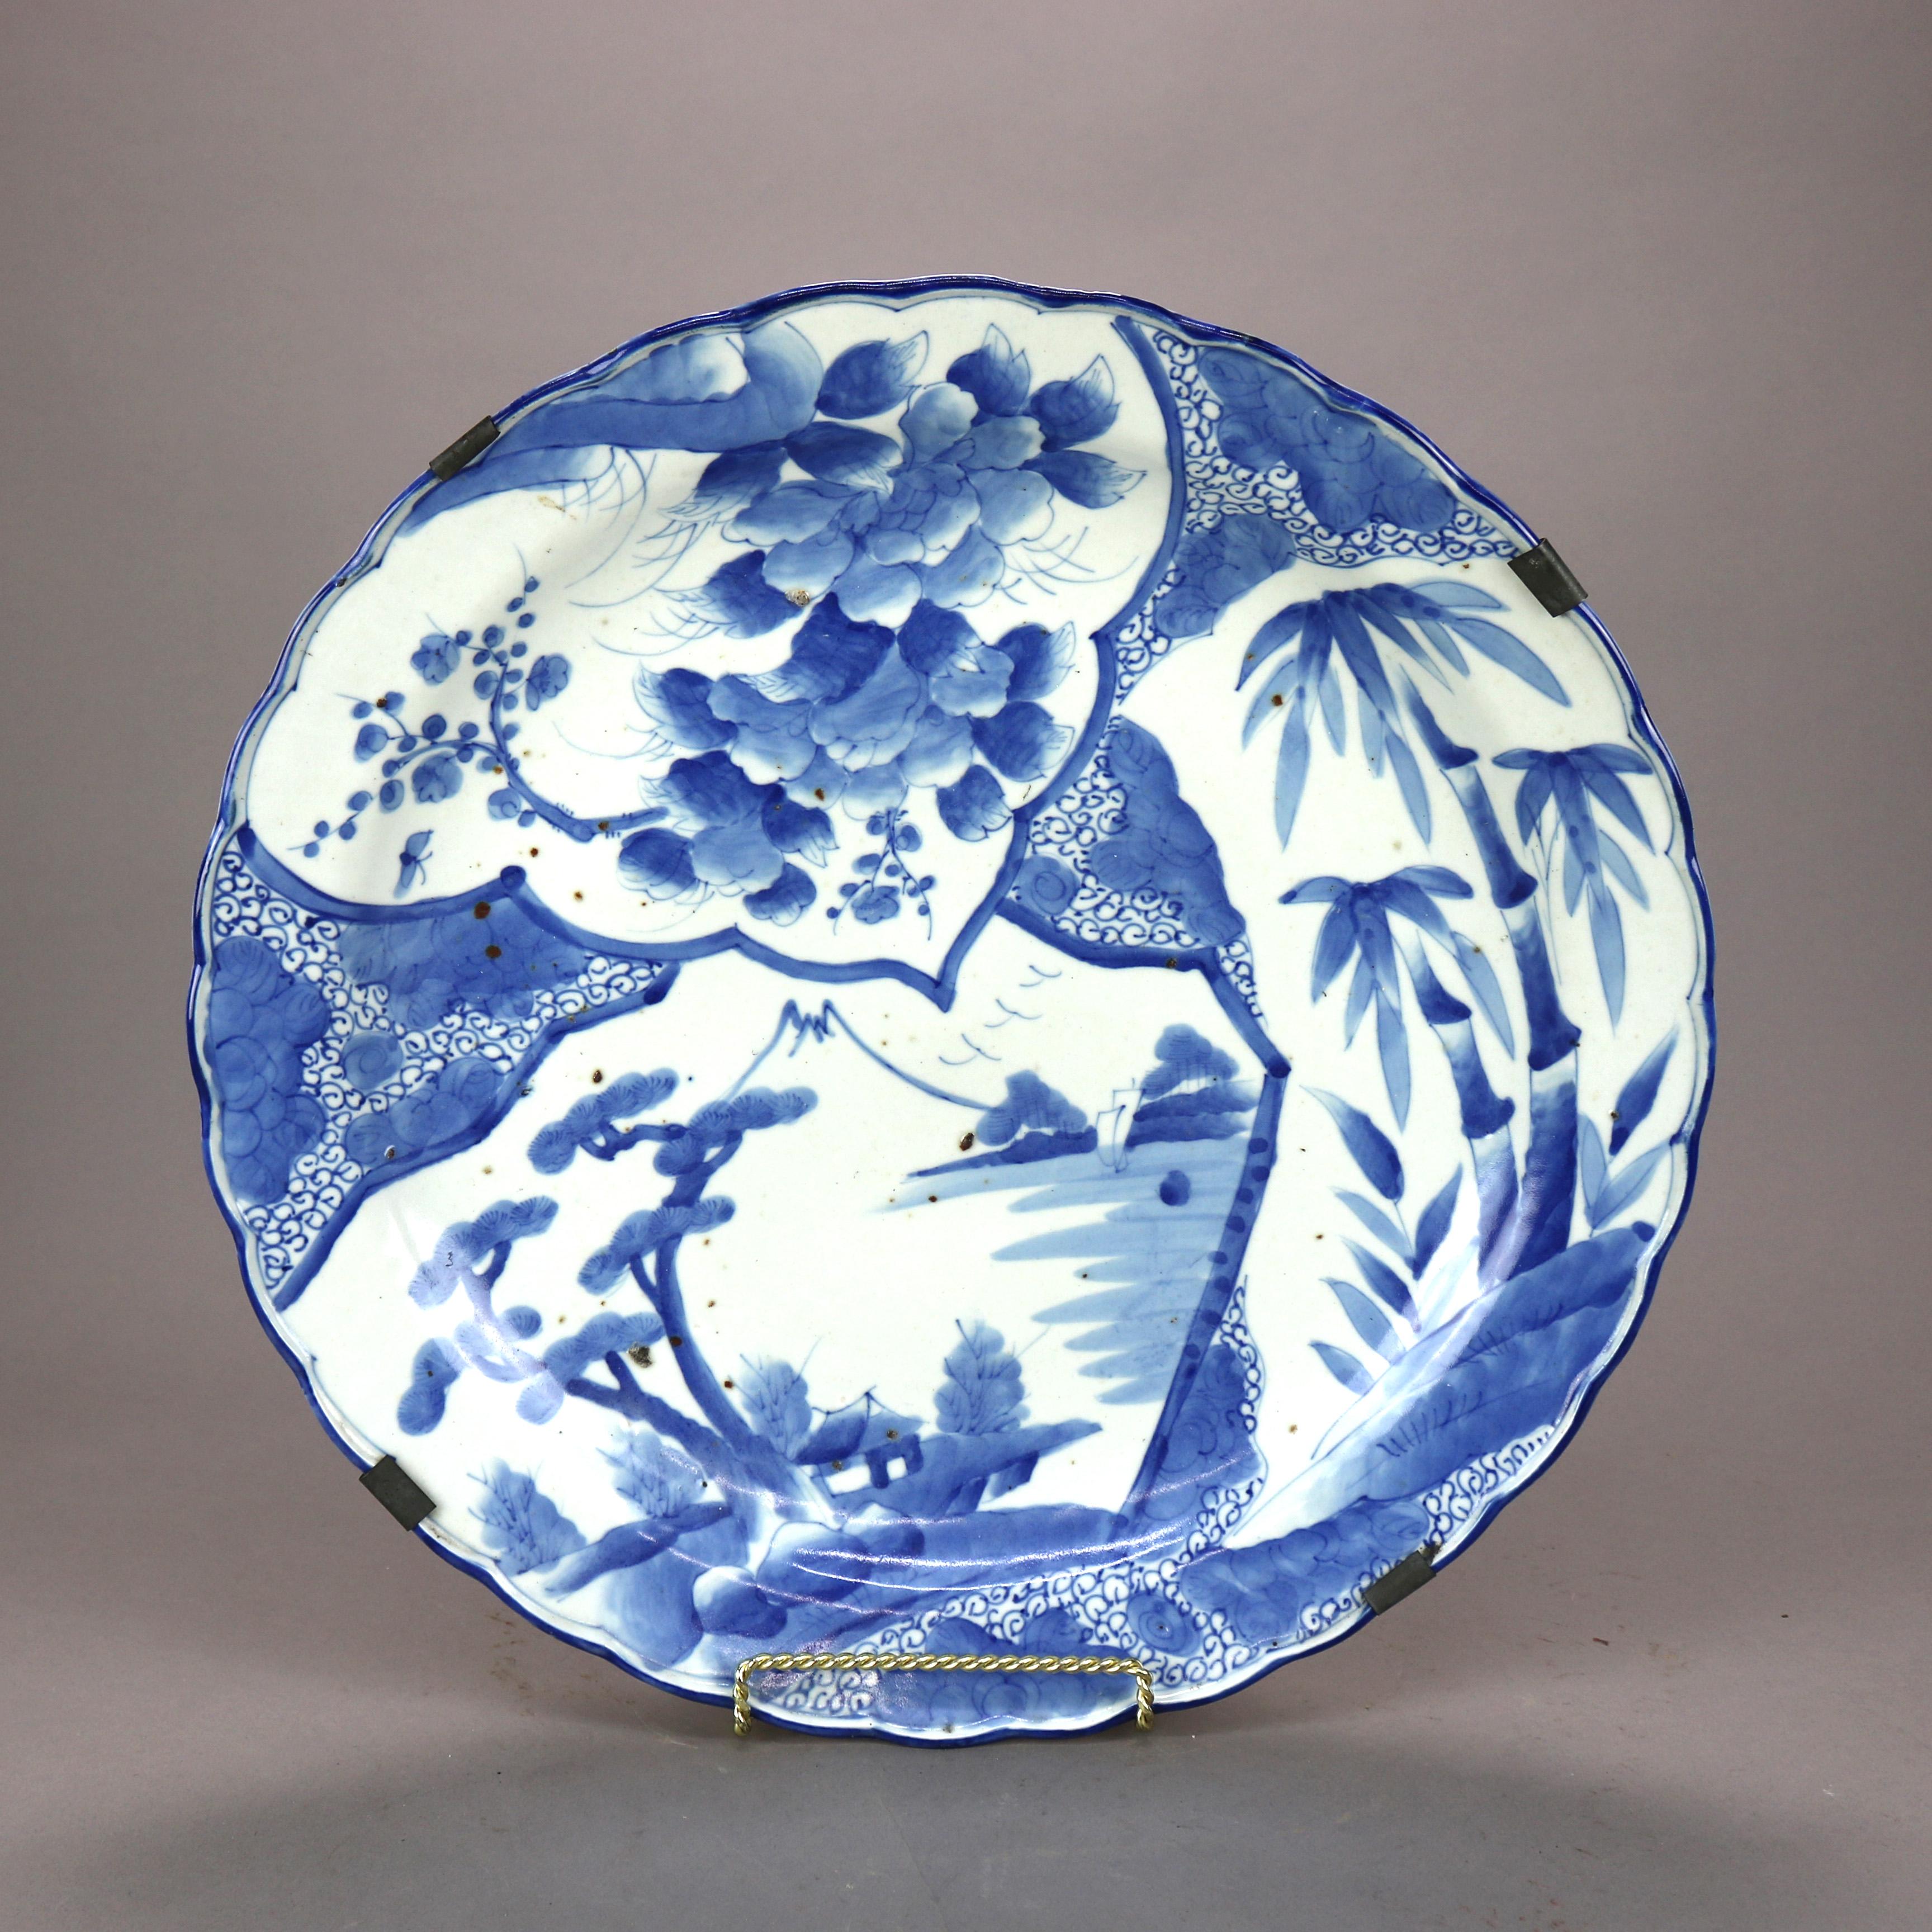 An antique and oversized Japanese Meiji charger offers porcelain construction with landscape scene in blue on white ground, en verso decoration, 19th century

Measures - 2.5'' height x 18.25'' width x 18.25'' diameter.